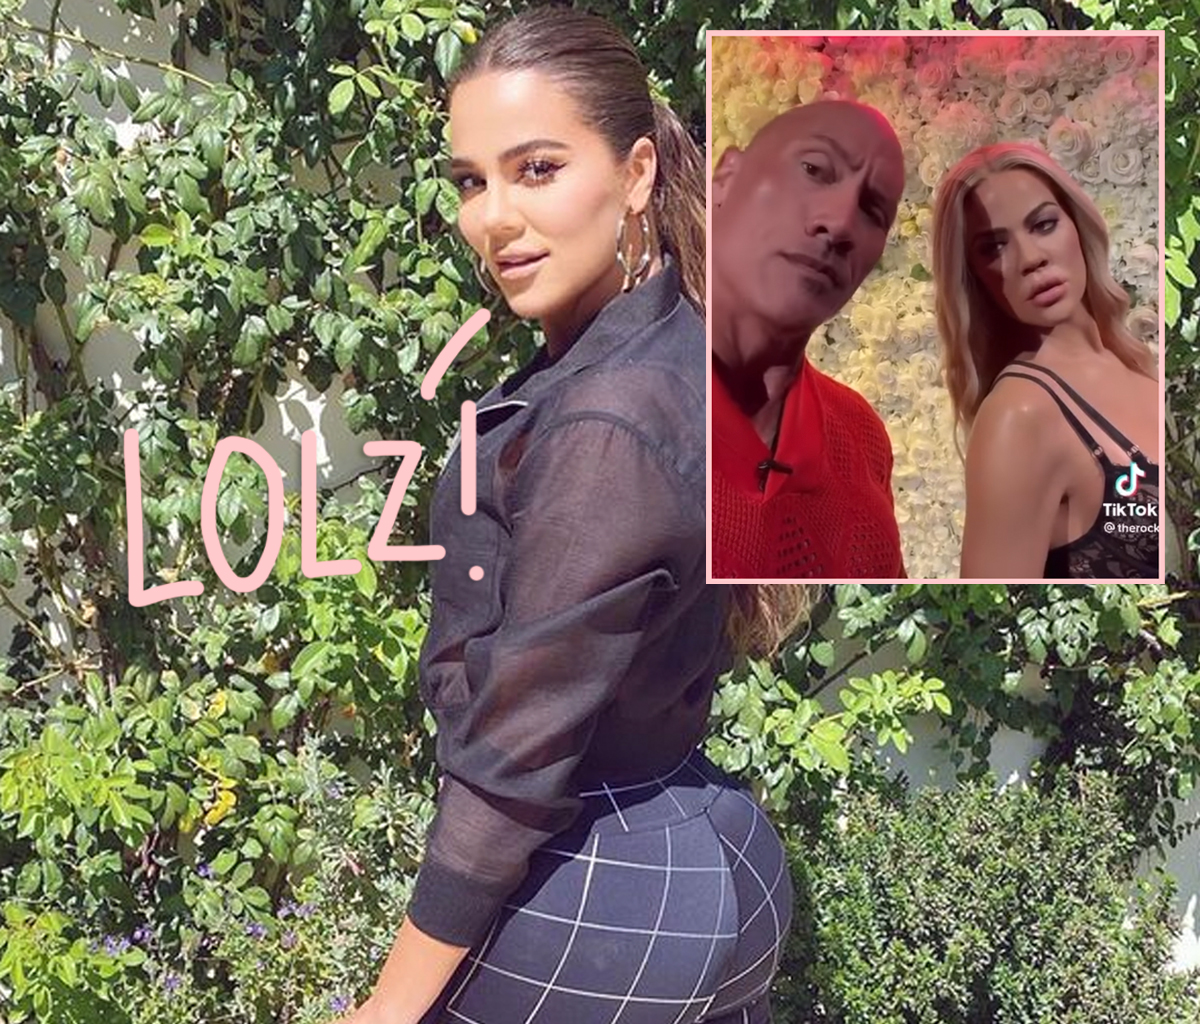 #Khloé Kardashian Reacts After Dwayne ‘The Rock’ Johnson Hilariously Compares Their Wax Figures Butts!